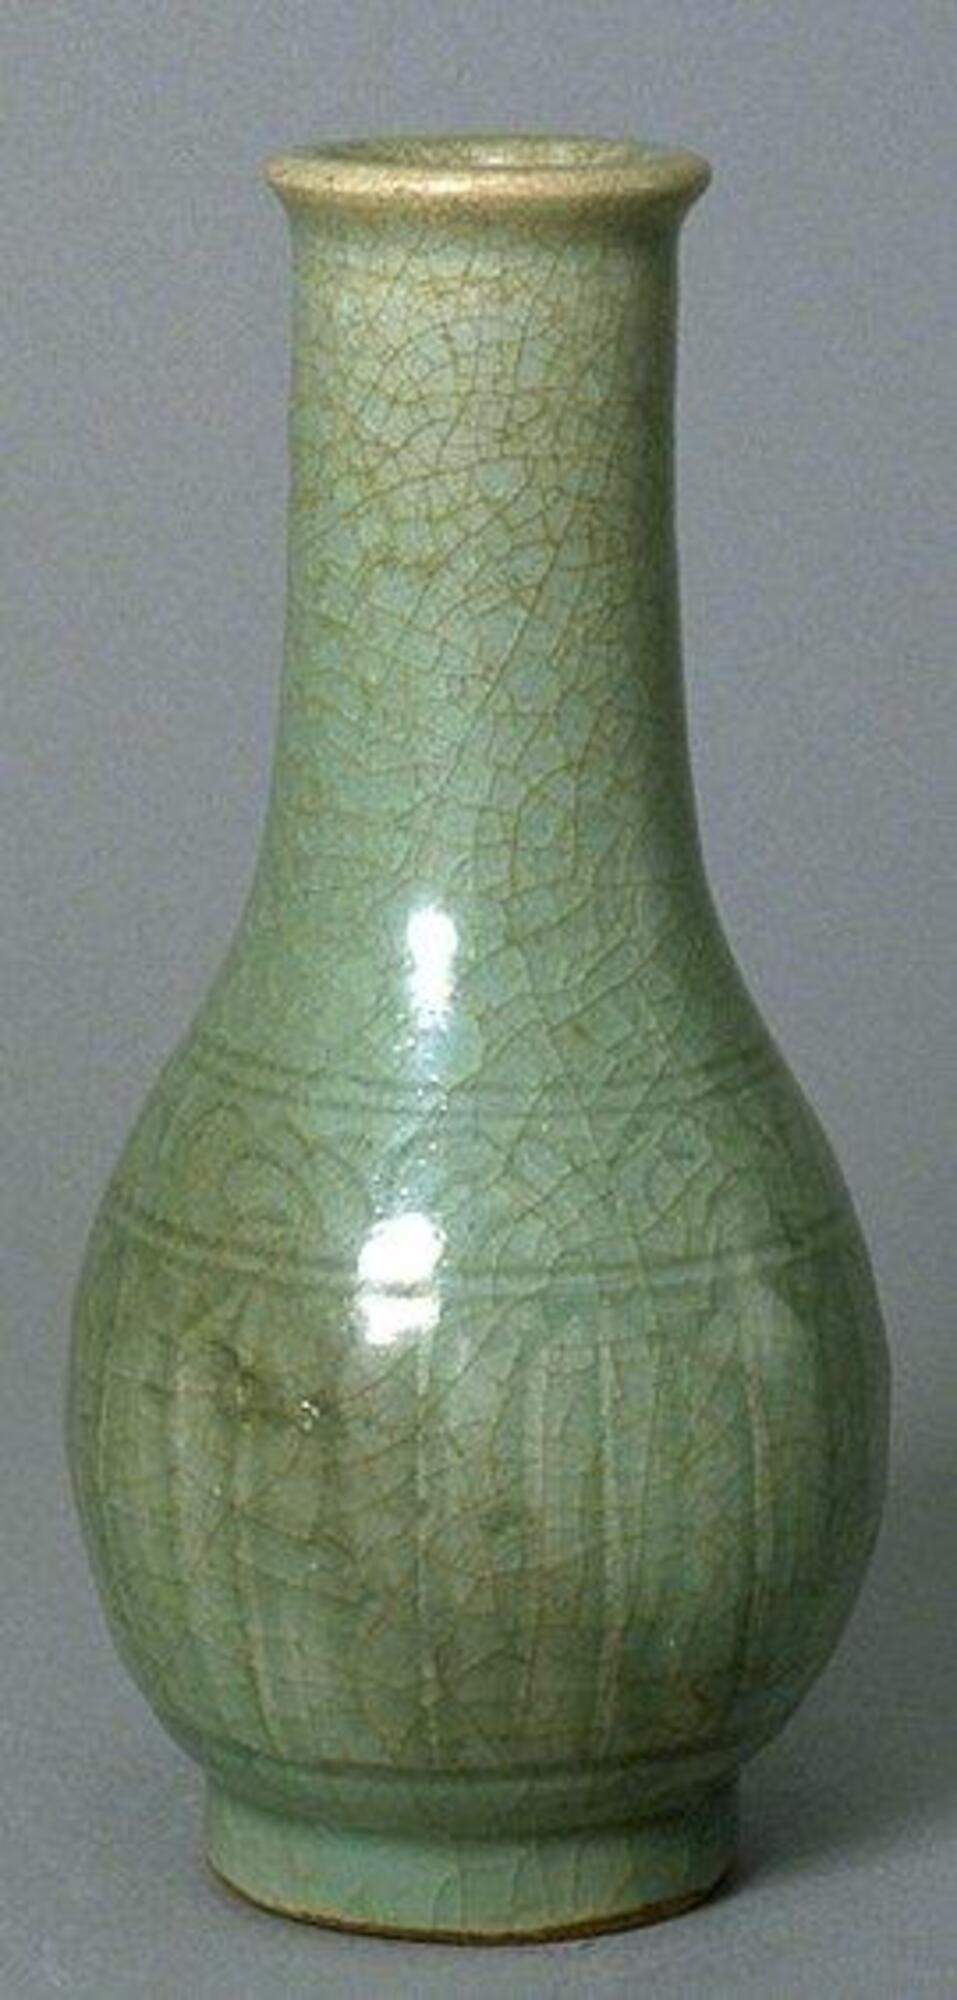 A stoneware bottle-shaped vase with a bulbous body tapering to a tall narrow neck with everted rim, on a tall footring. It has incised lappets around the lower body and a band of floral meander around the shoulder. It is covered in a craqueleur celadon glaze. 